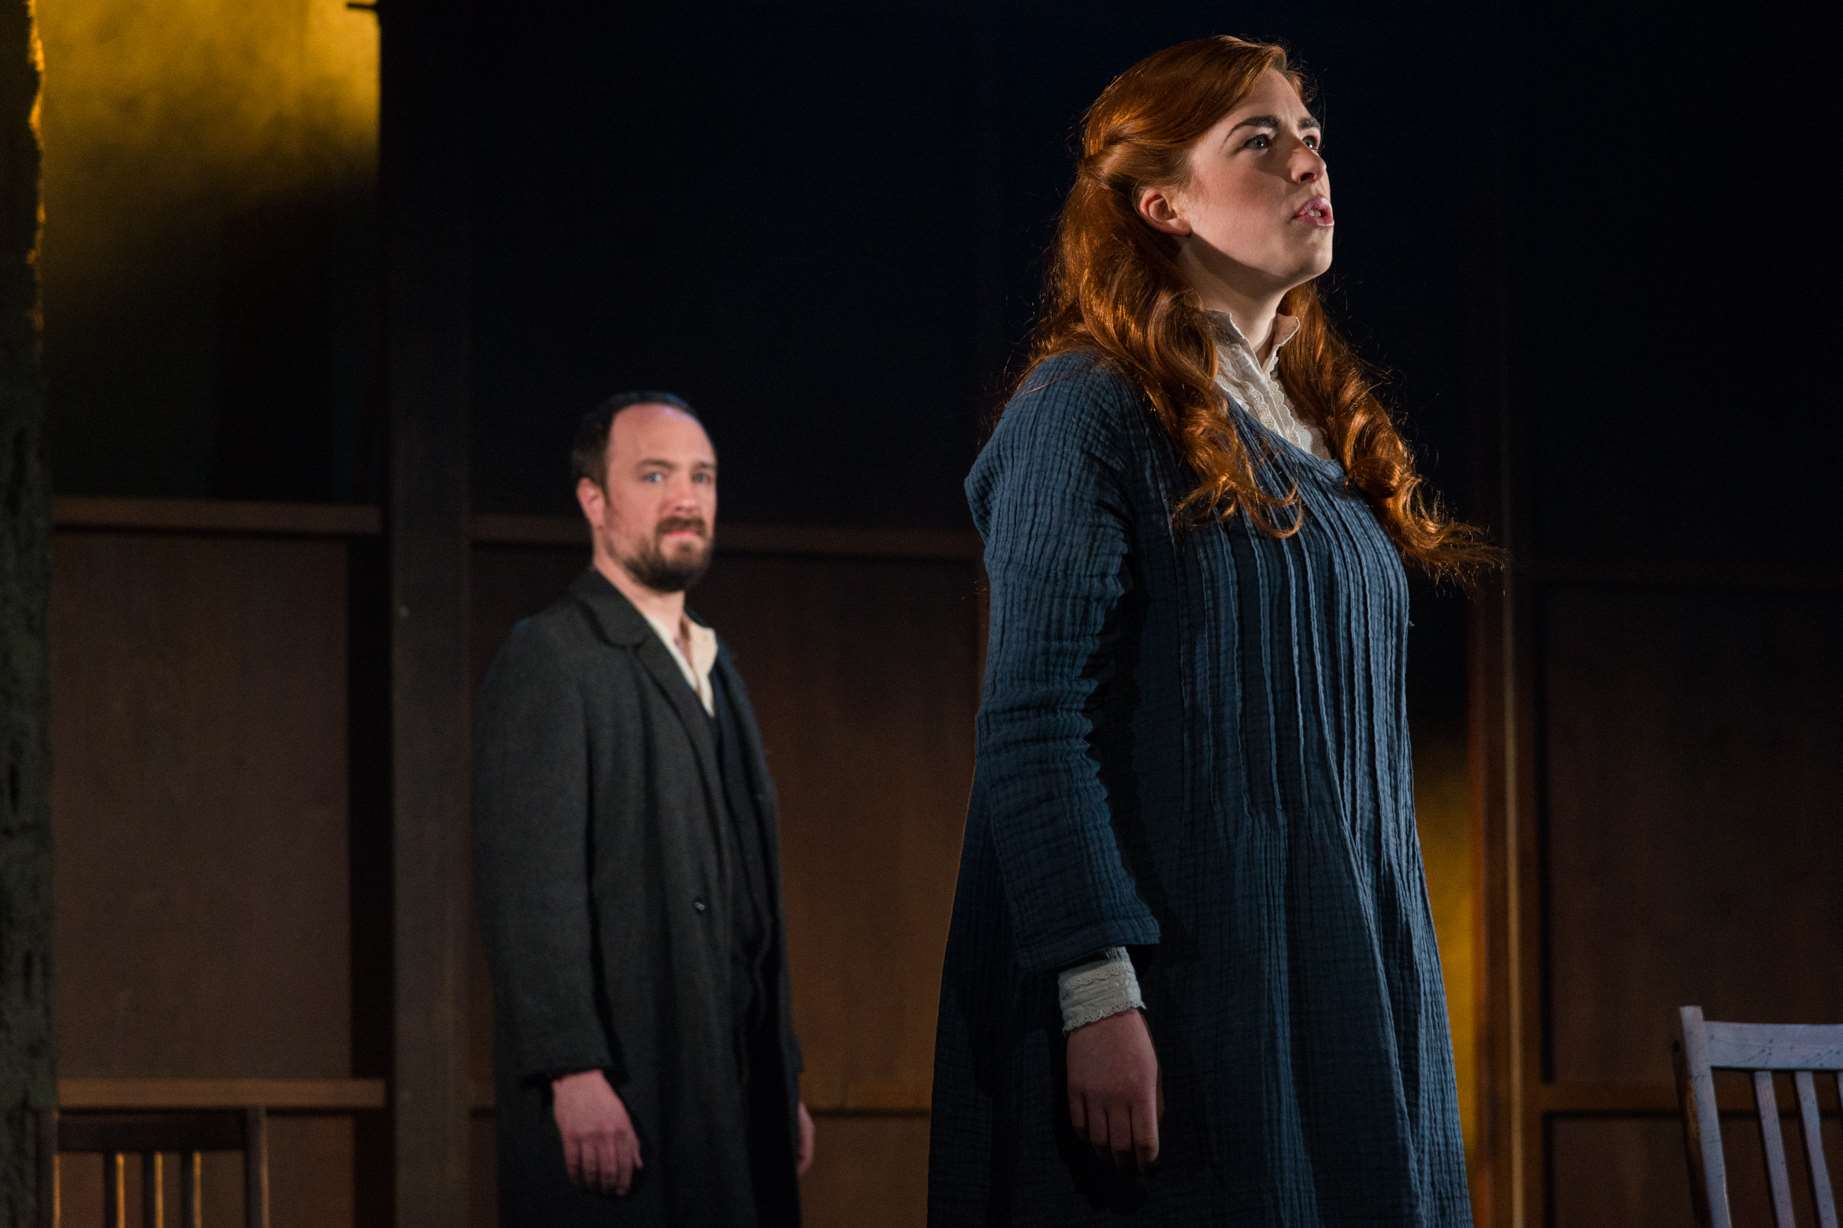 Eoin Slattery as John Proctor and Lucy Keirl as Abigail Williams in The Crucible